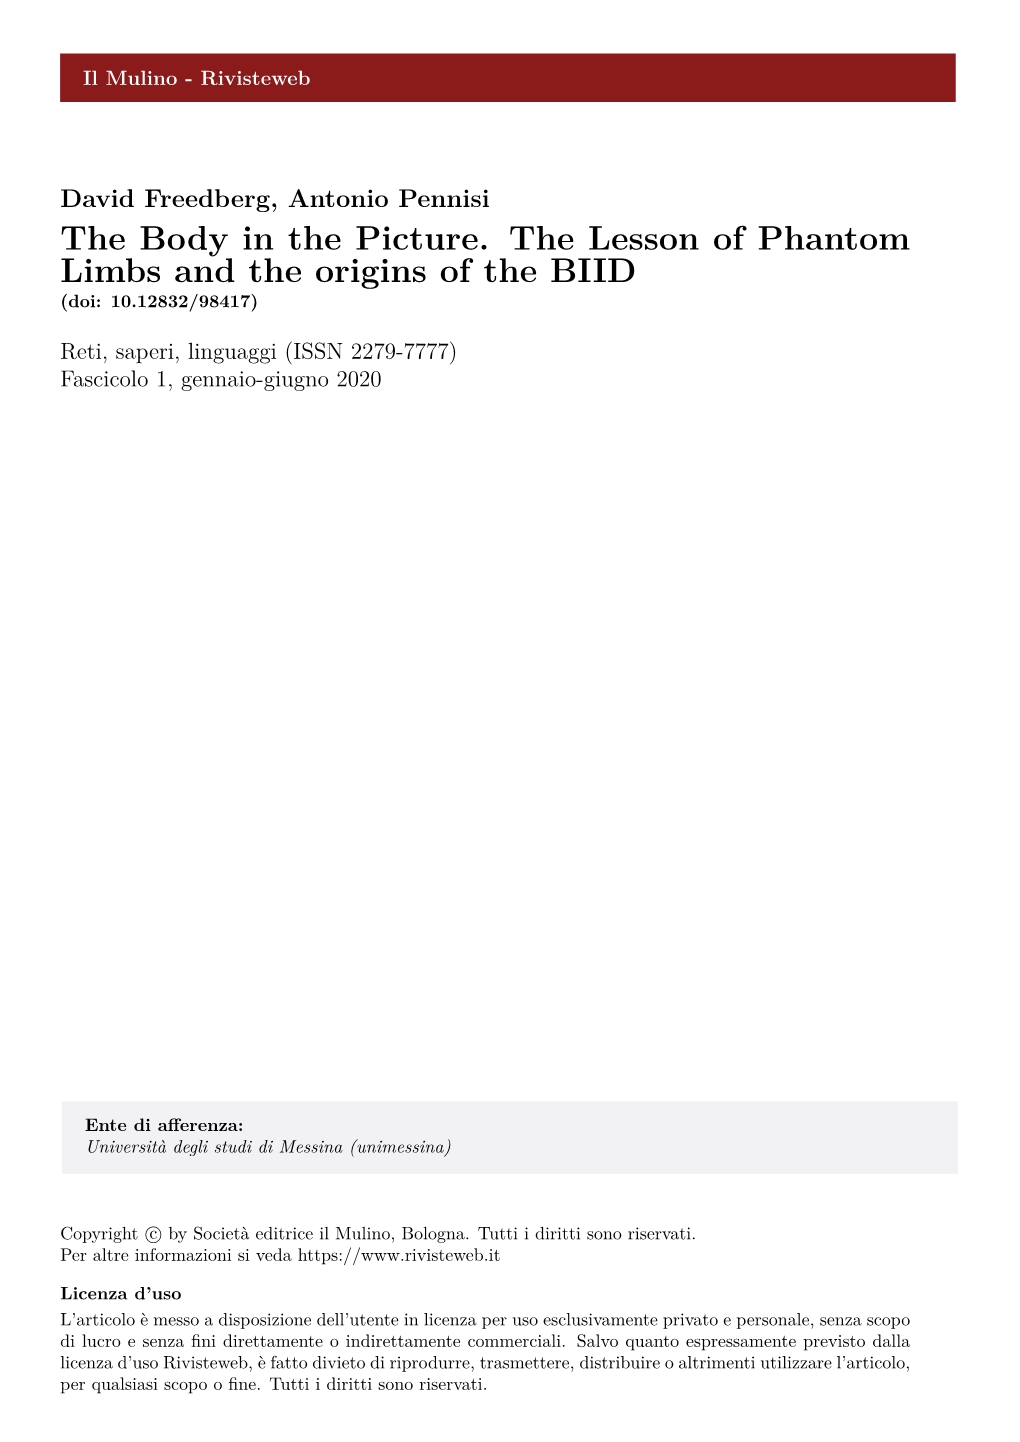 The Body in the Picture. the Lesson of Phantom Limbs and the Origins of the BIID (Doi: 10.12832/98417)